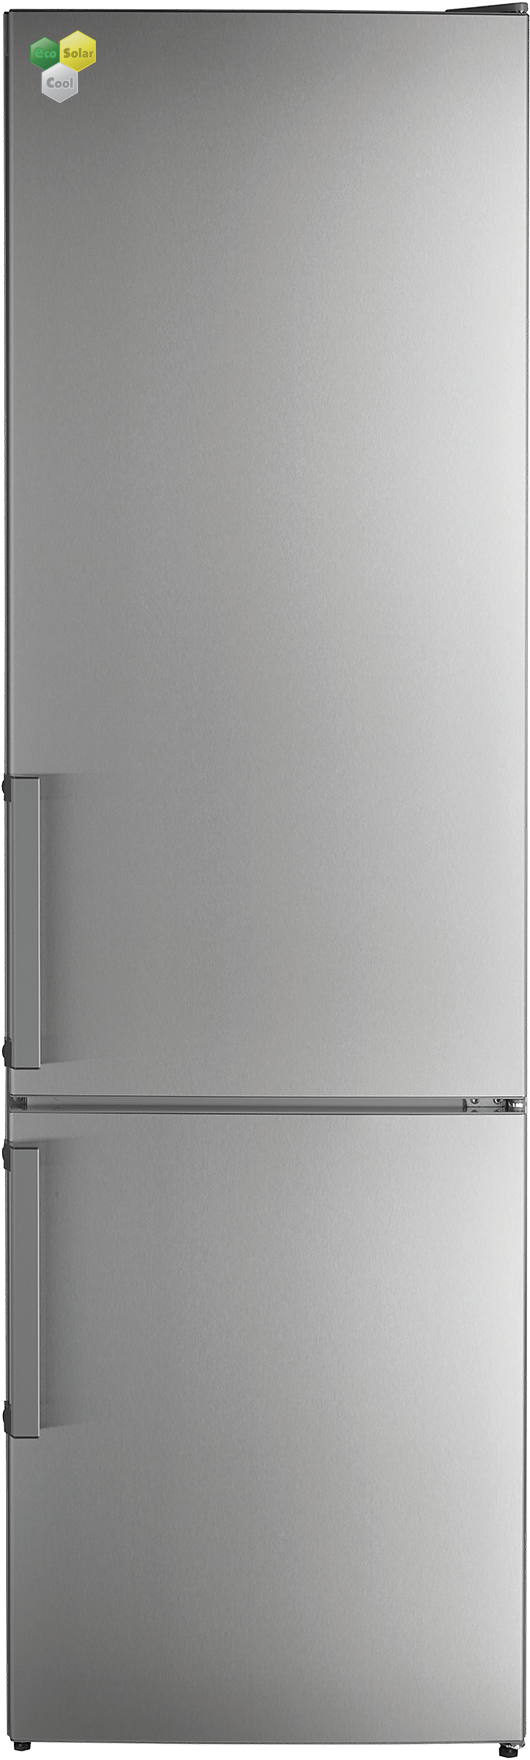 Modern Stainless Steel Refrigerator PNG